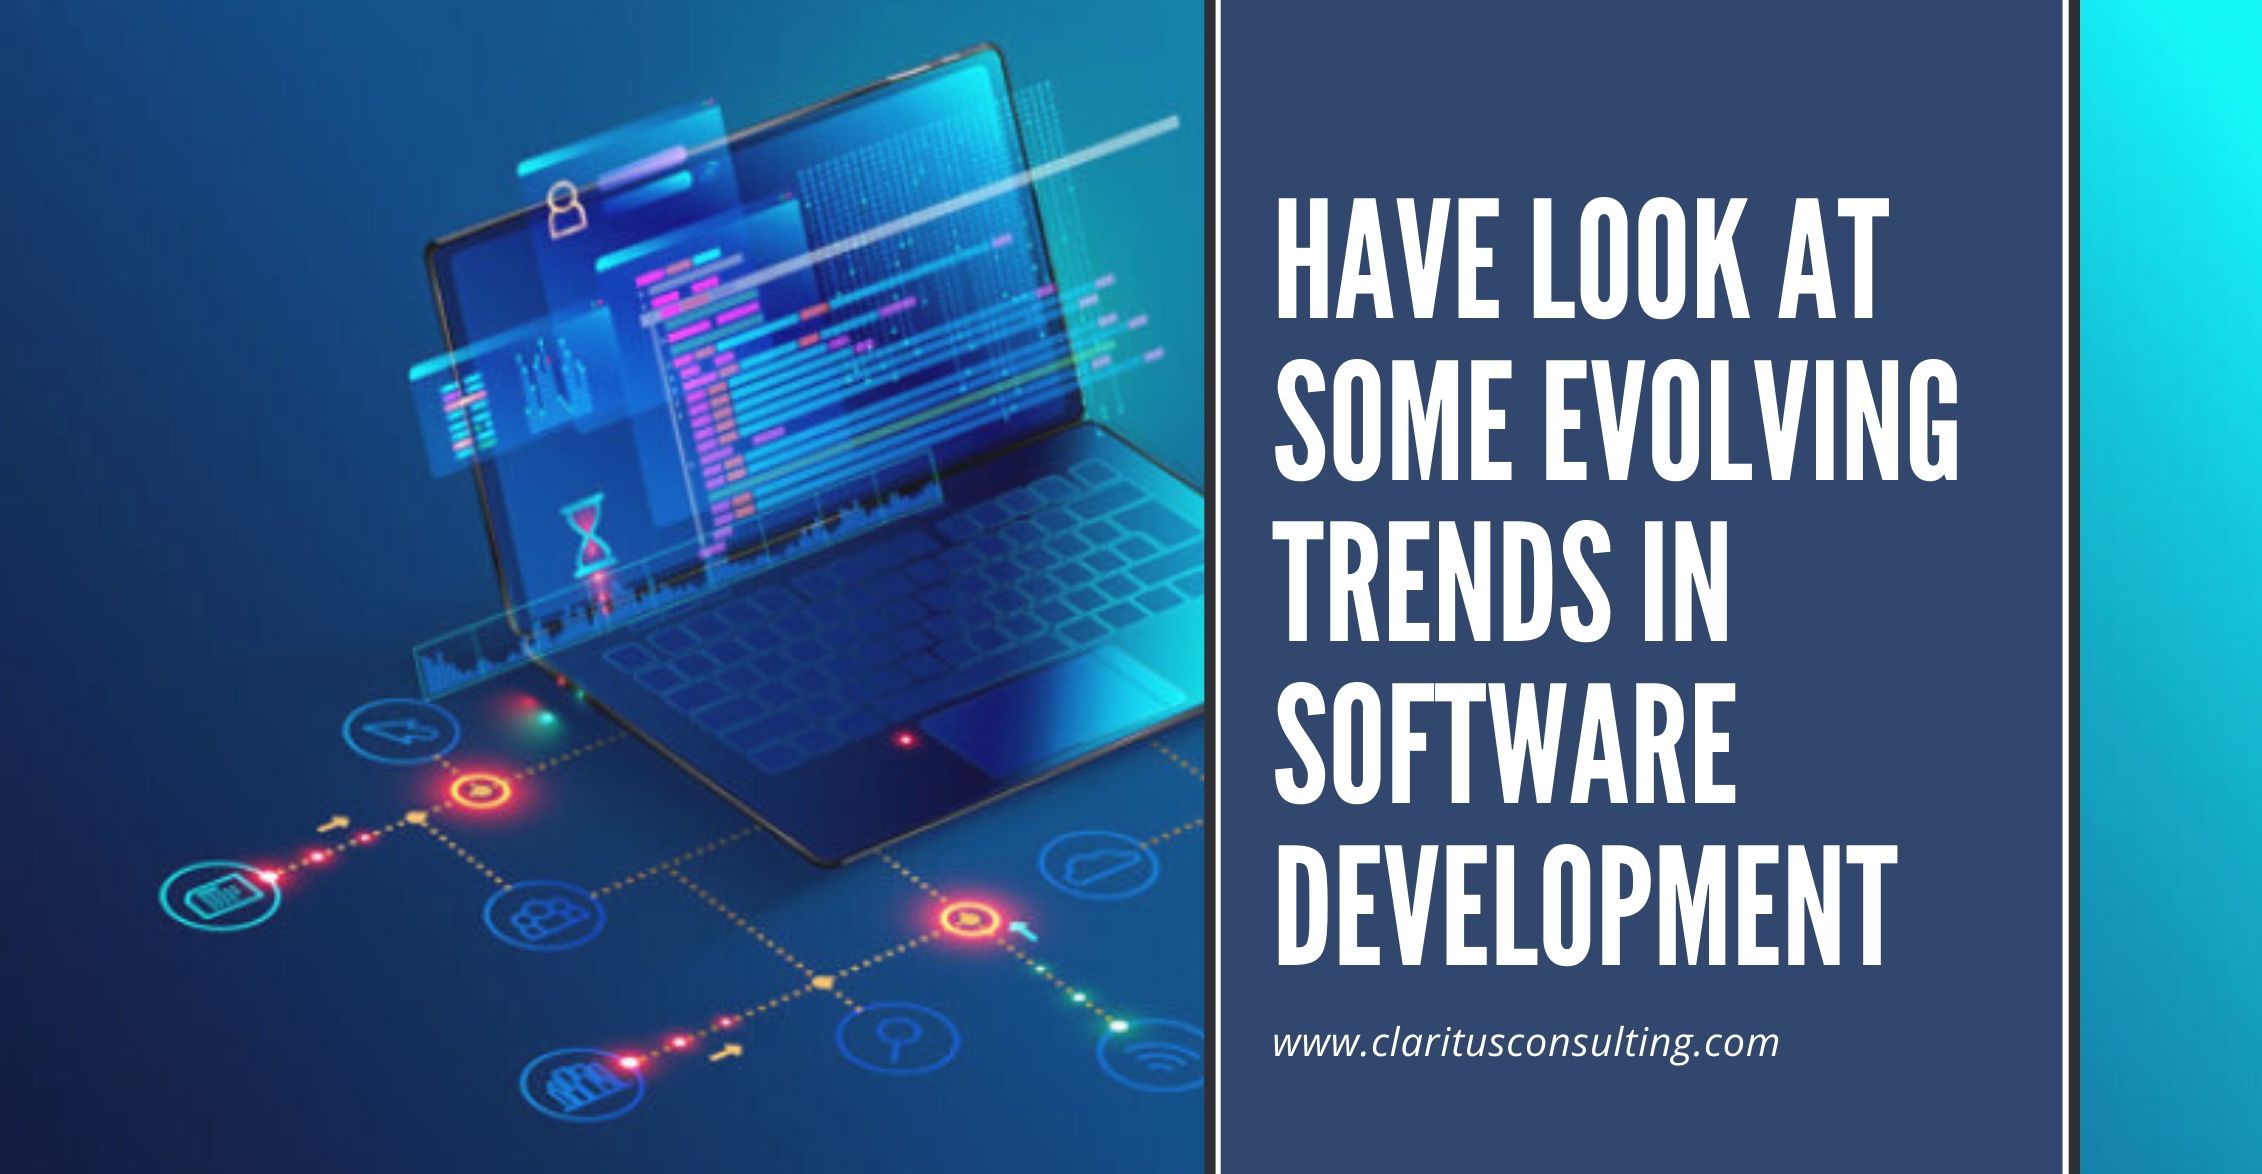 Copy of Have Look At Some Evolving Trends In Software Development